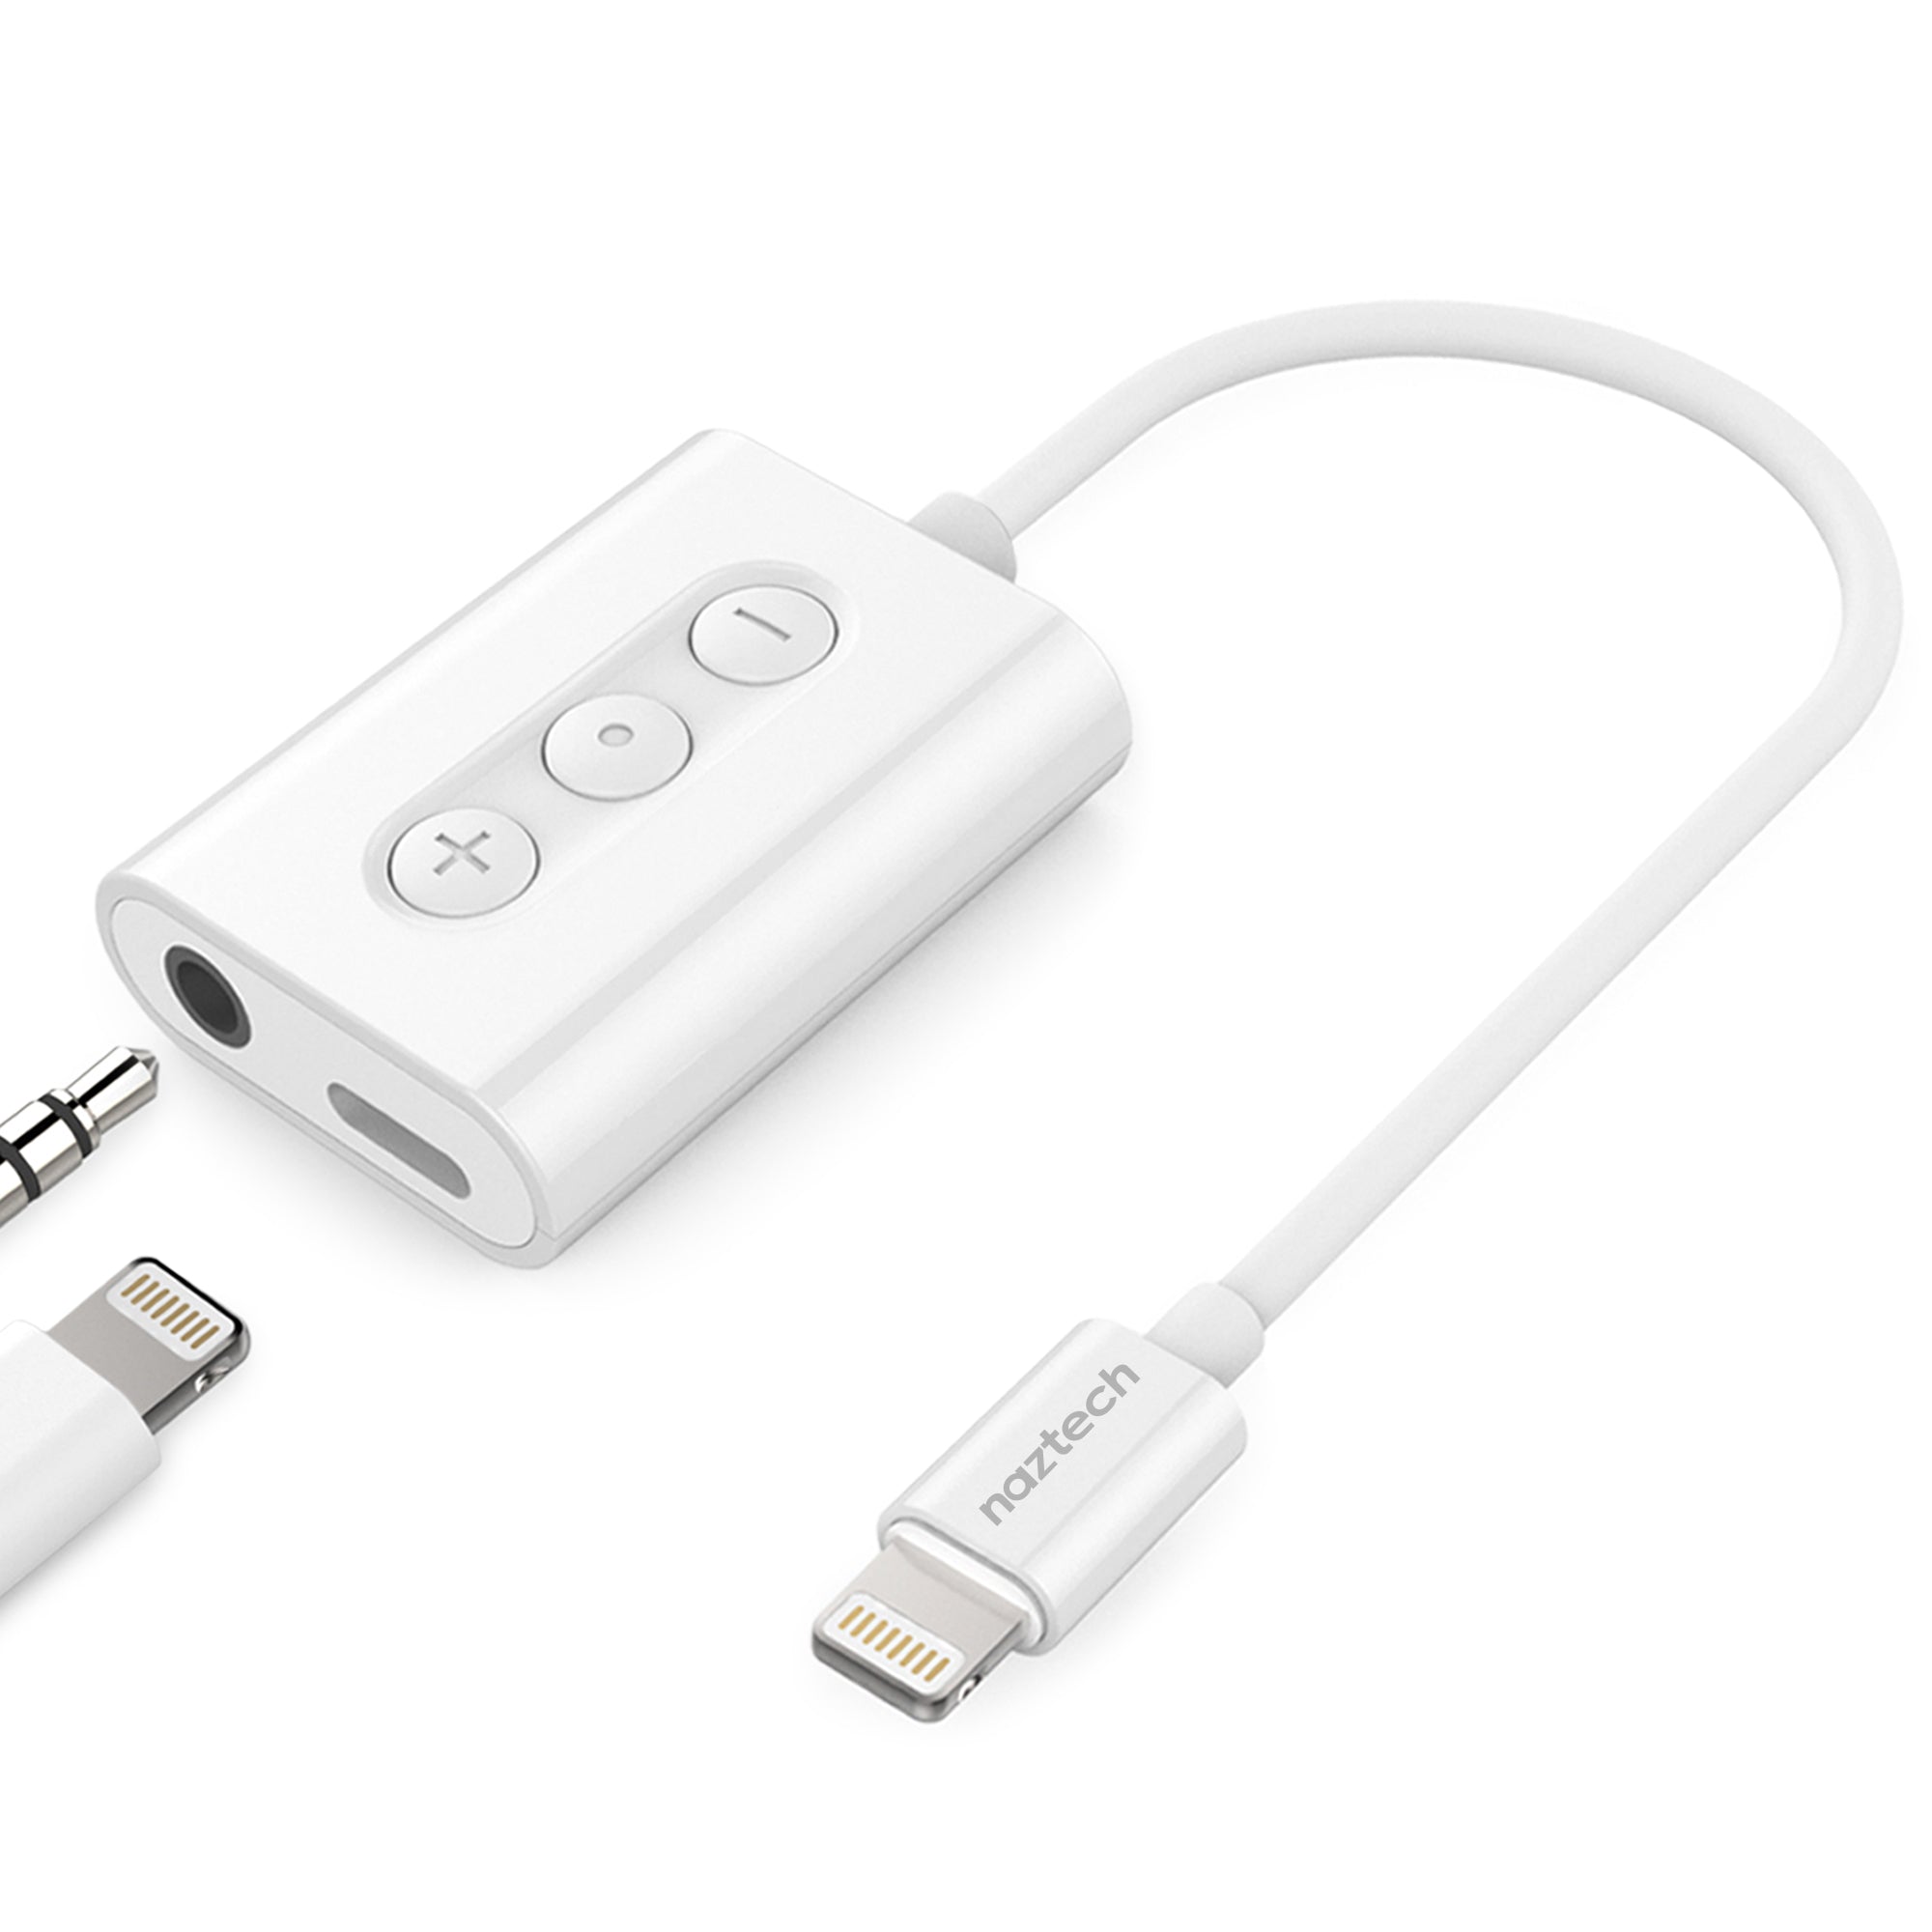 Danmark Nybegynder olie iPhone Charger and Headphone Adapter | Naztech – Naztech.com